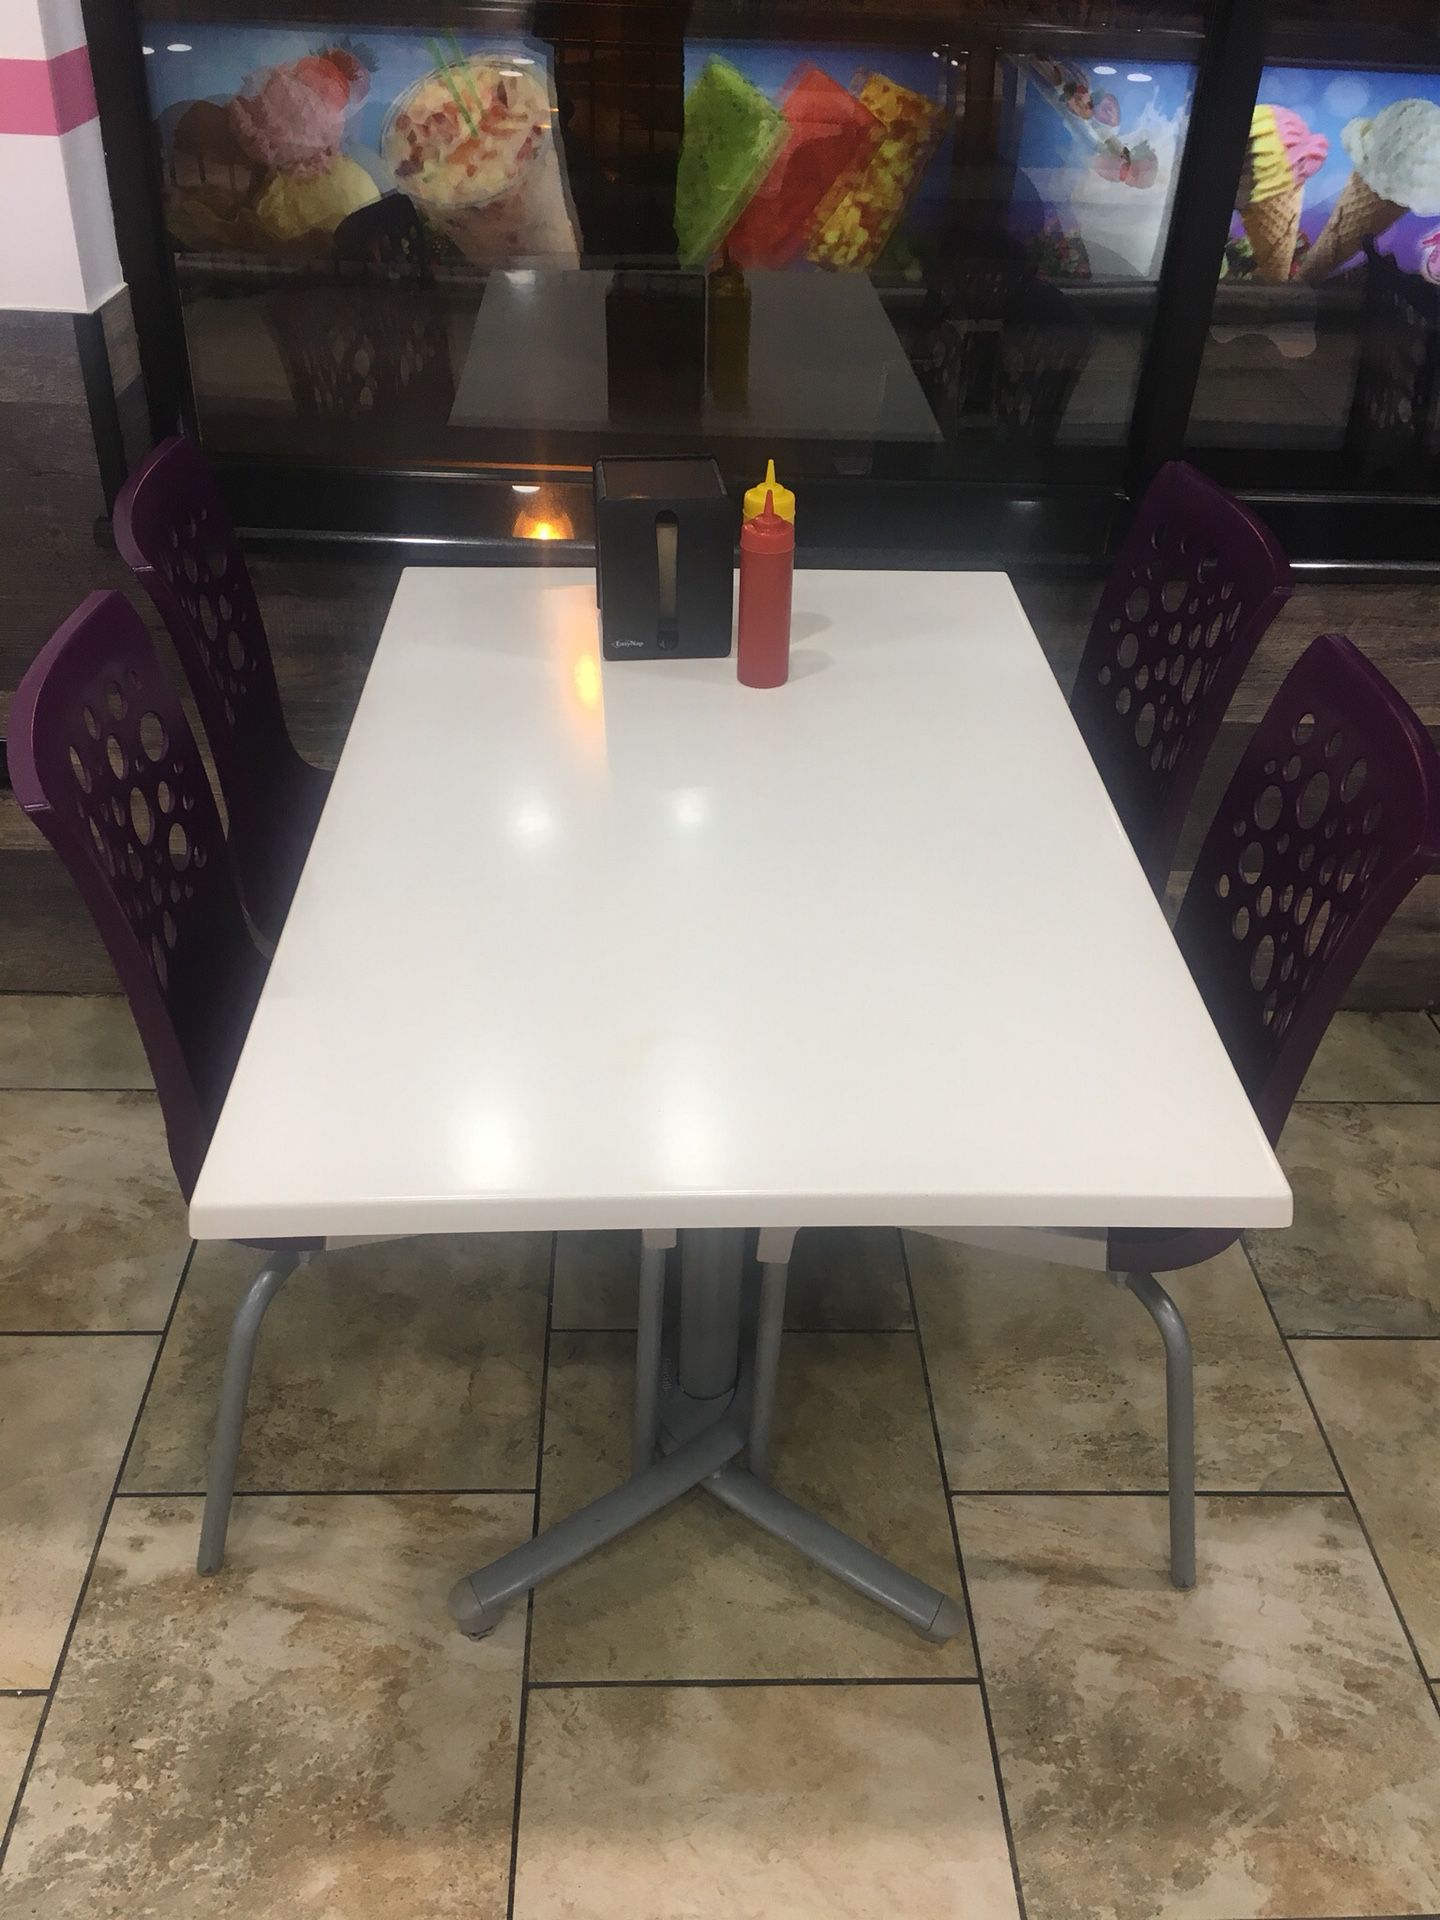 3 restaurant tables with seats